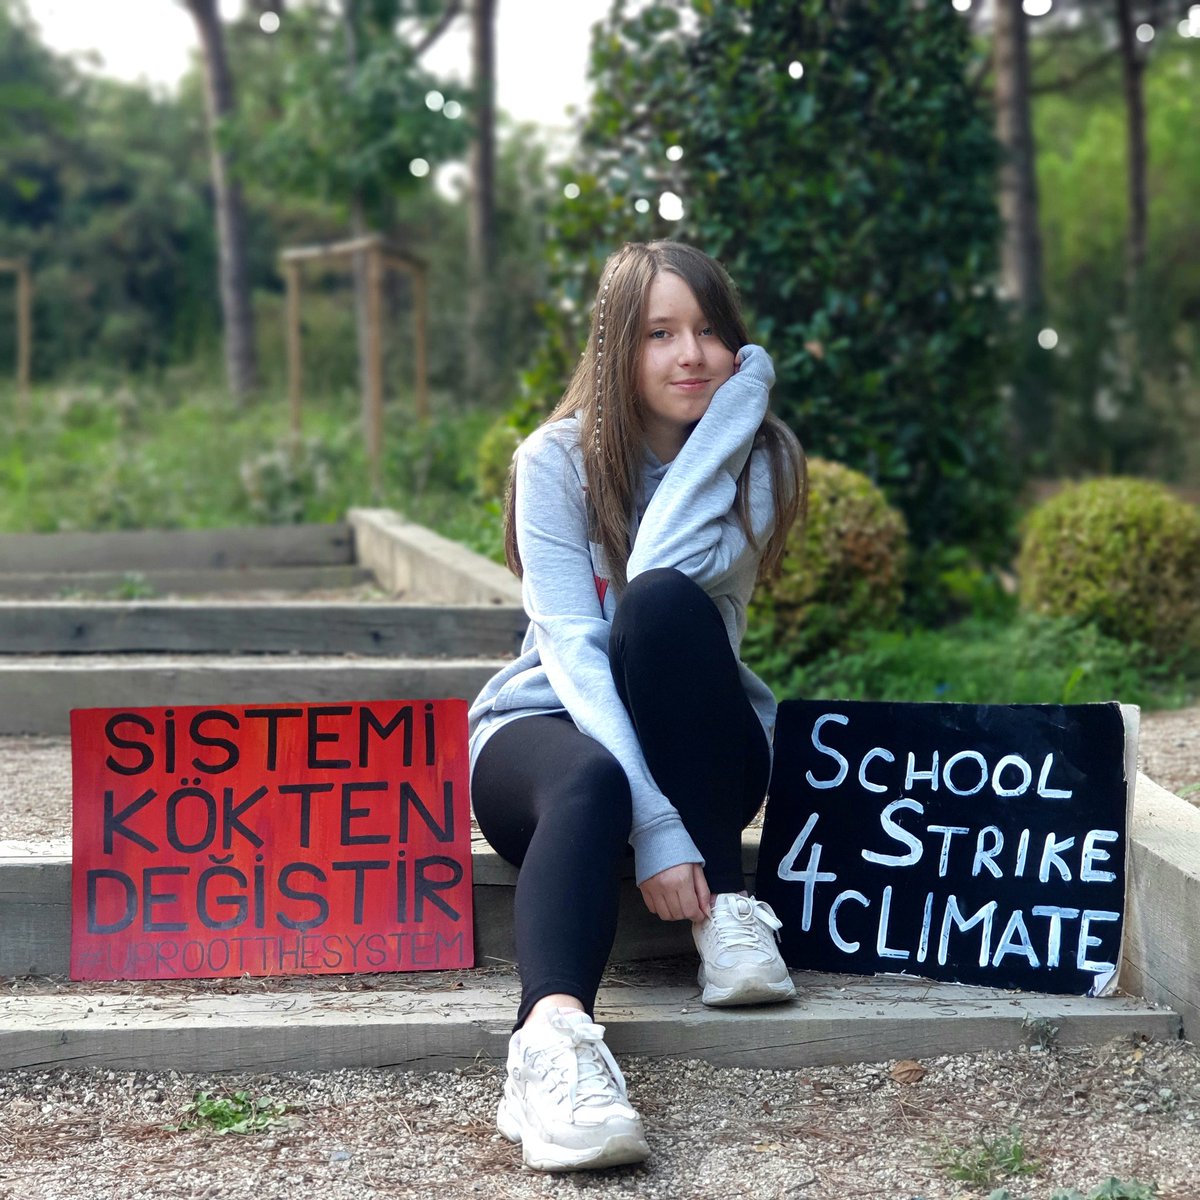 My 130th week on #ClimateStrike 🌎 Today marks my two and a half years of weekly school striking, and I got my new sign ready for next week's Global Climate Strike 🌎 #UprootTheSystem #FaceTheClimateEmergency  #schoolstrike4climate #FridaysForFuture #İklimGrevi2021